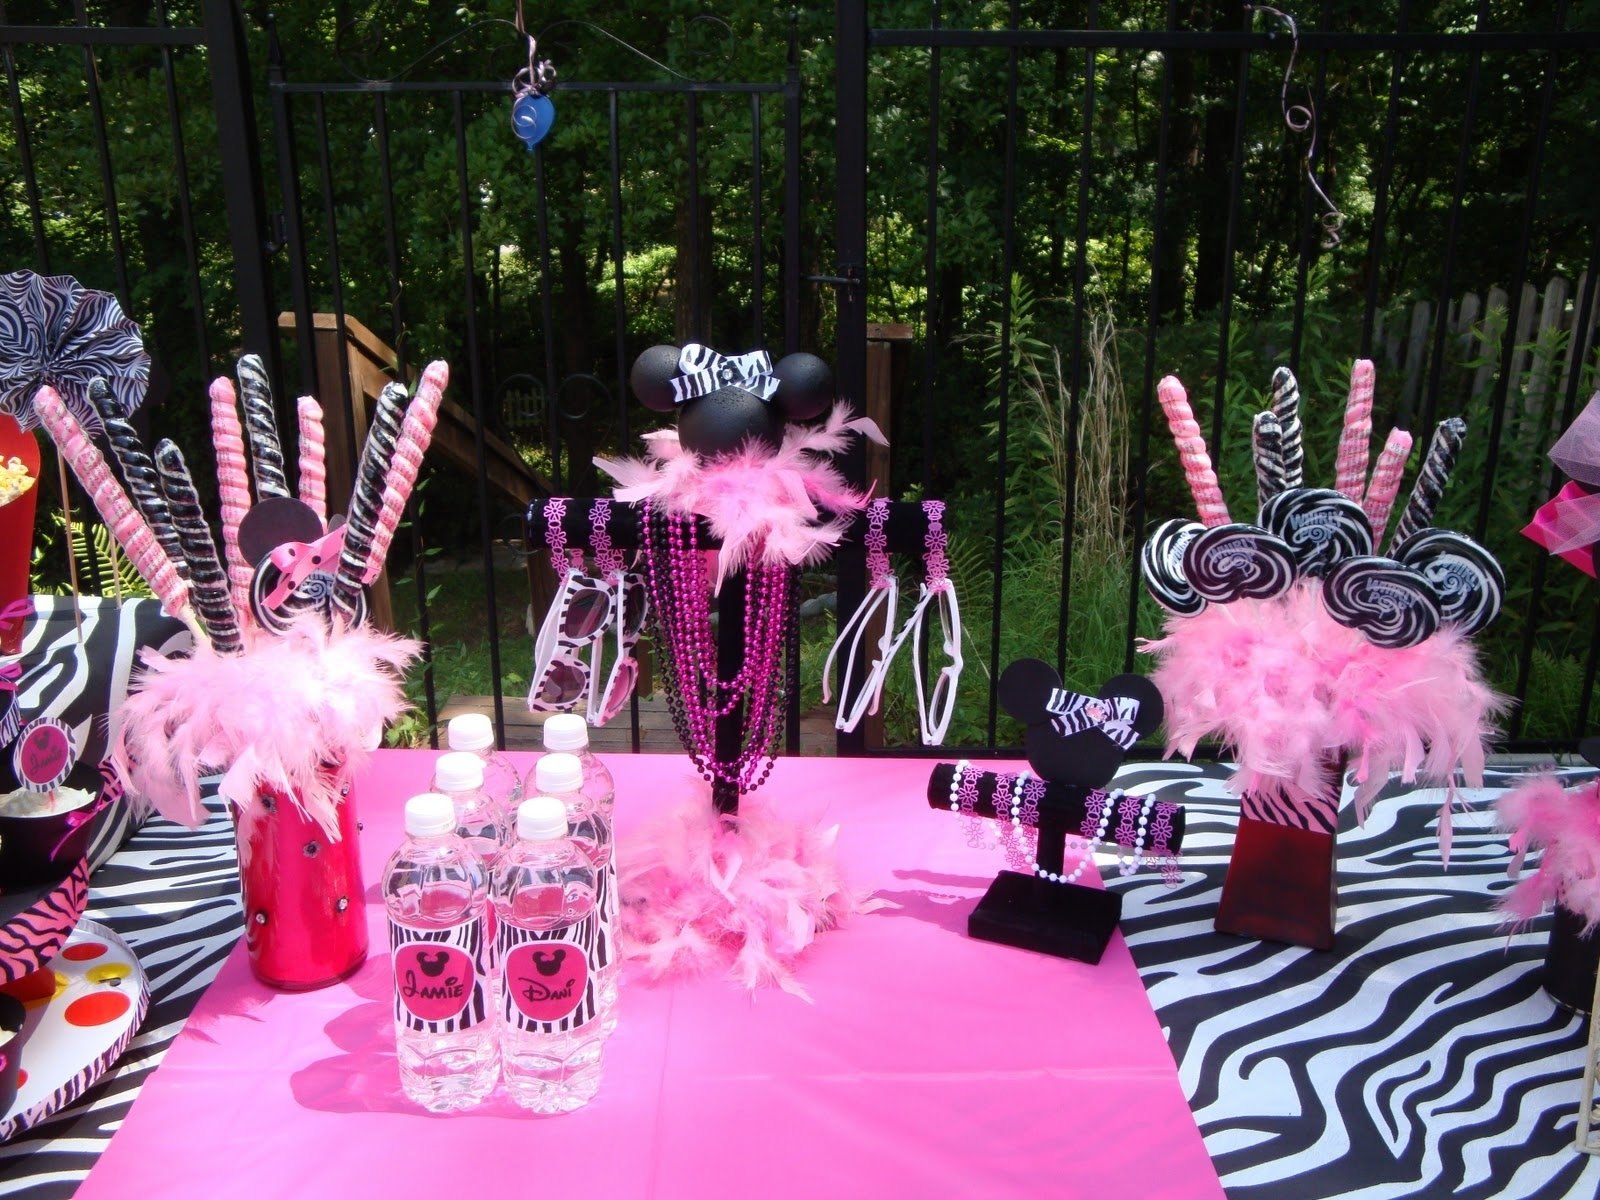 10 Ideal Pink And Zebra Party Ideas pink zebra print party ideas the party people online magazine 2 2022